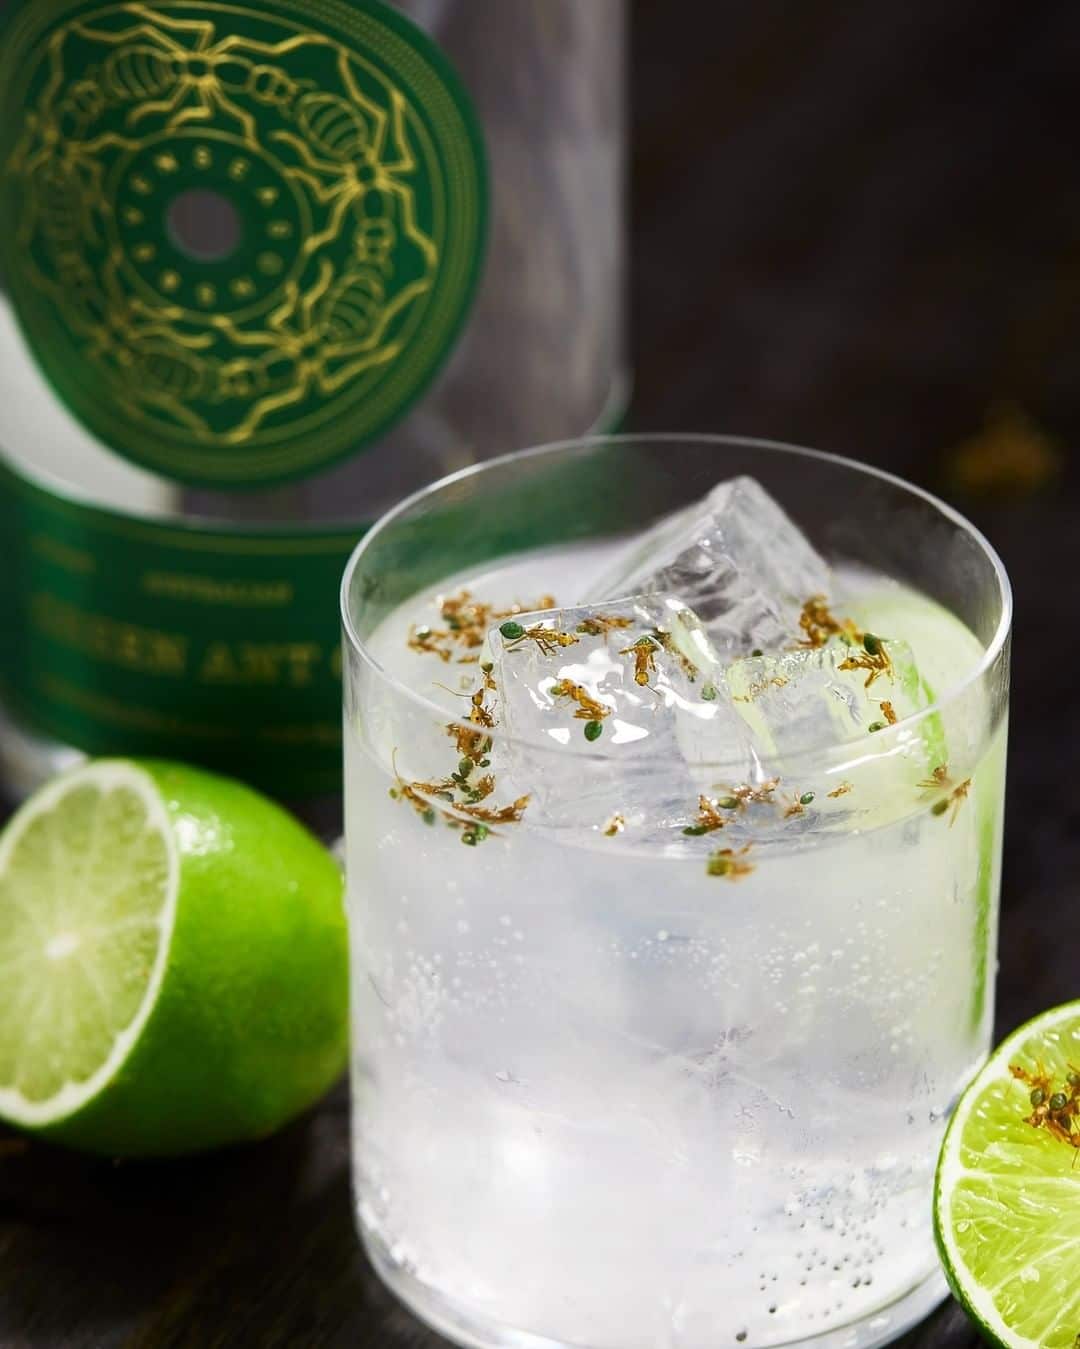 Win 1 of 3 Bottles of Green Ant Gin from Seven Seasons